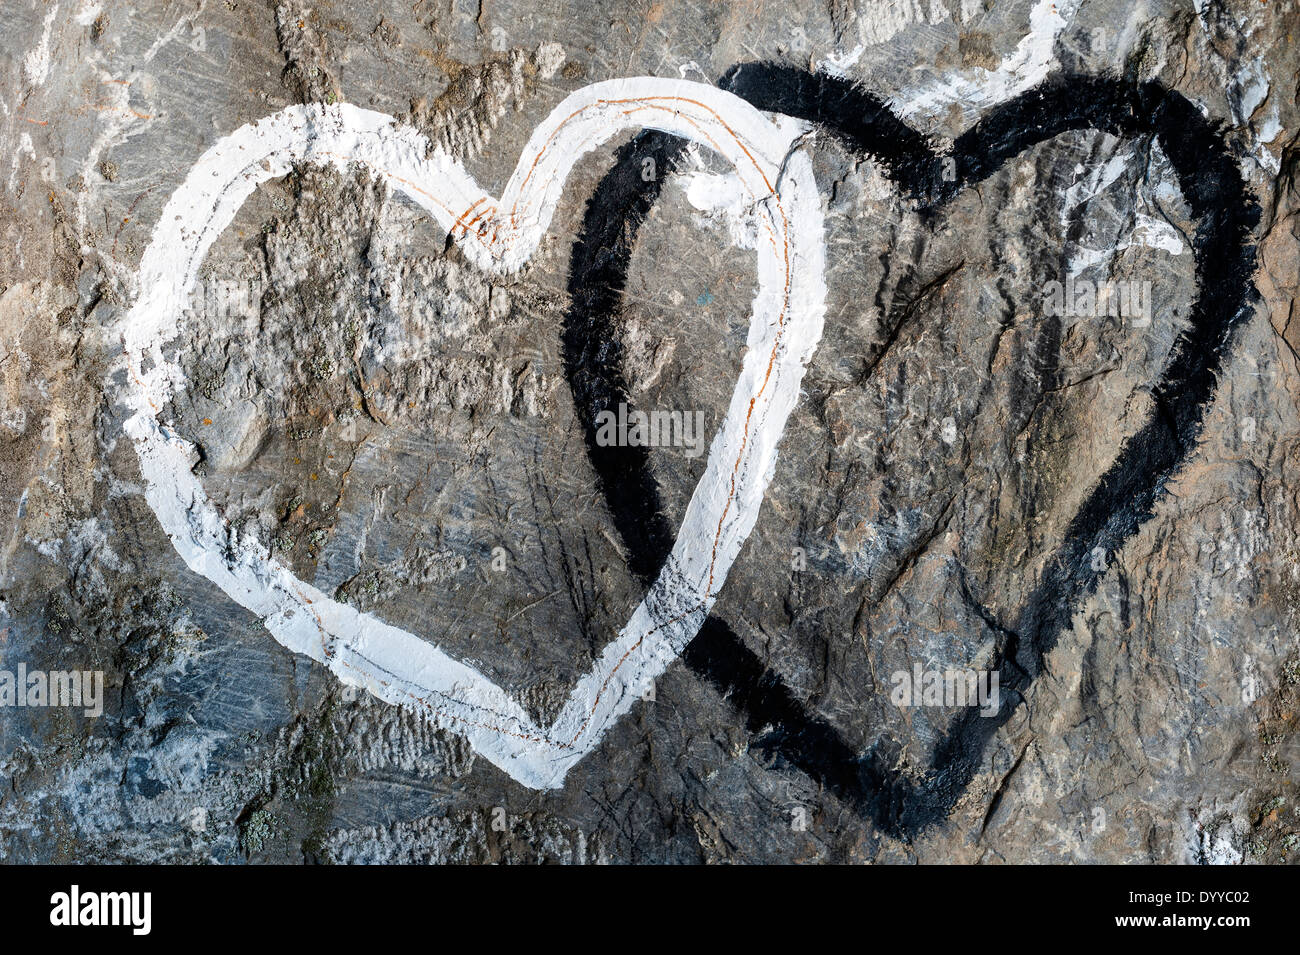 Two intertwined hearts painted on a rock face Stock Photo